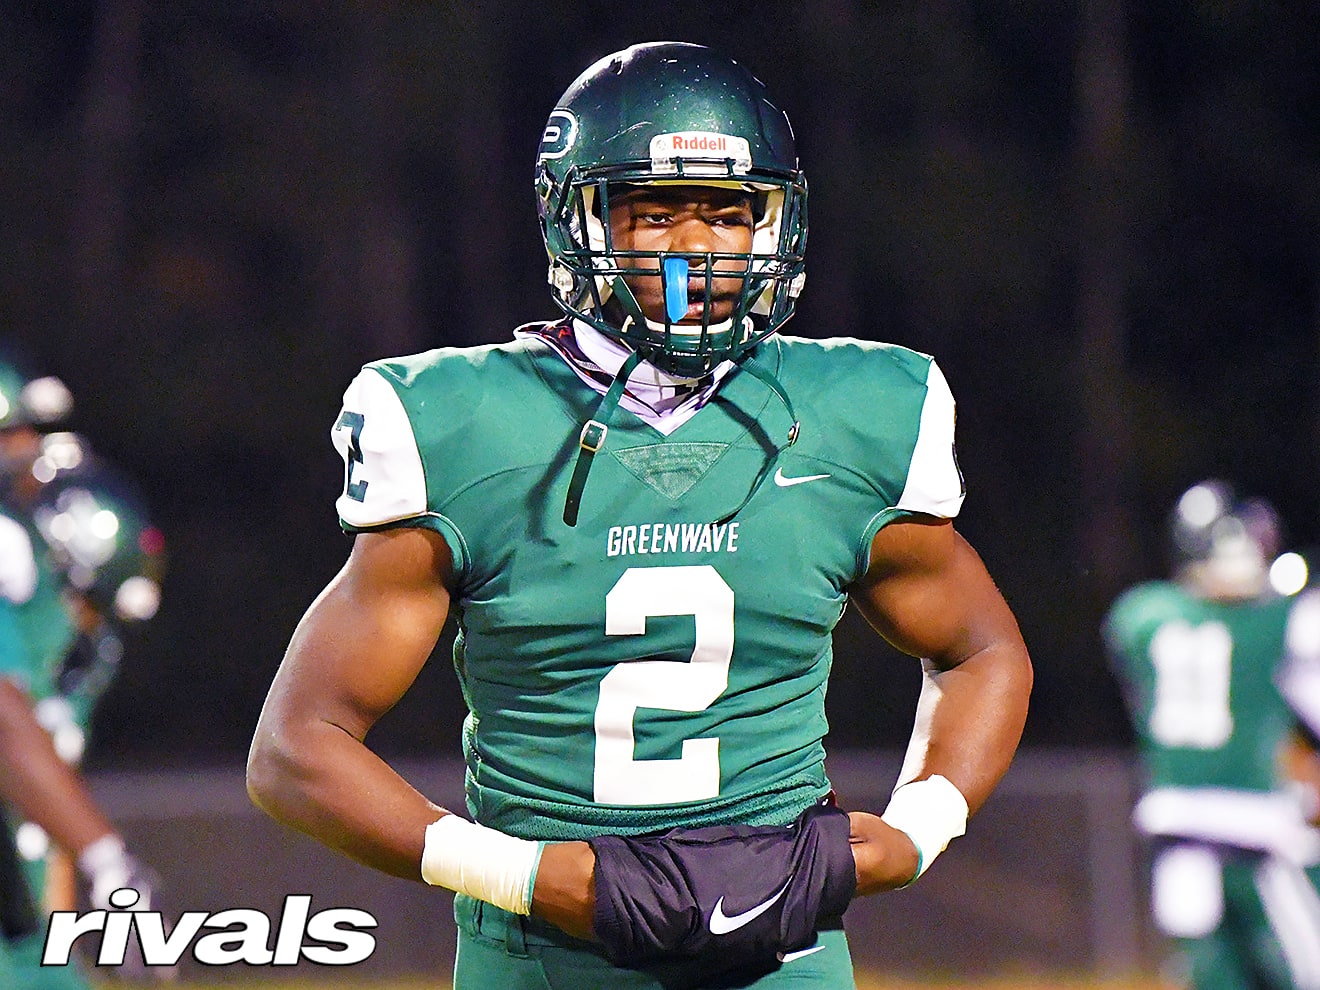 Ponchatoula 4-star defensive back Jacoby Mathews signs with Texas A&M